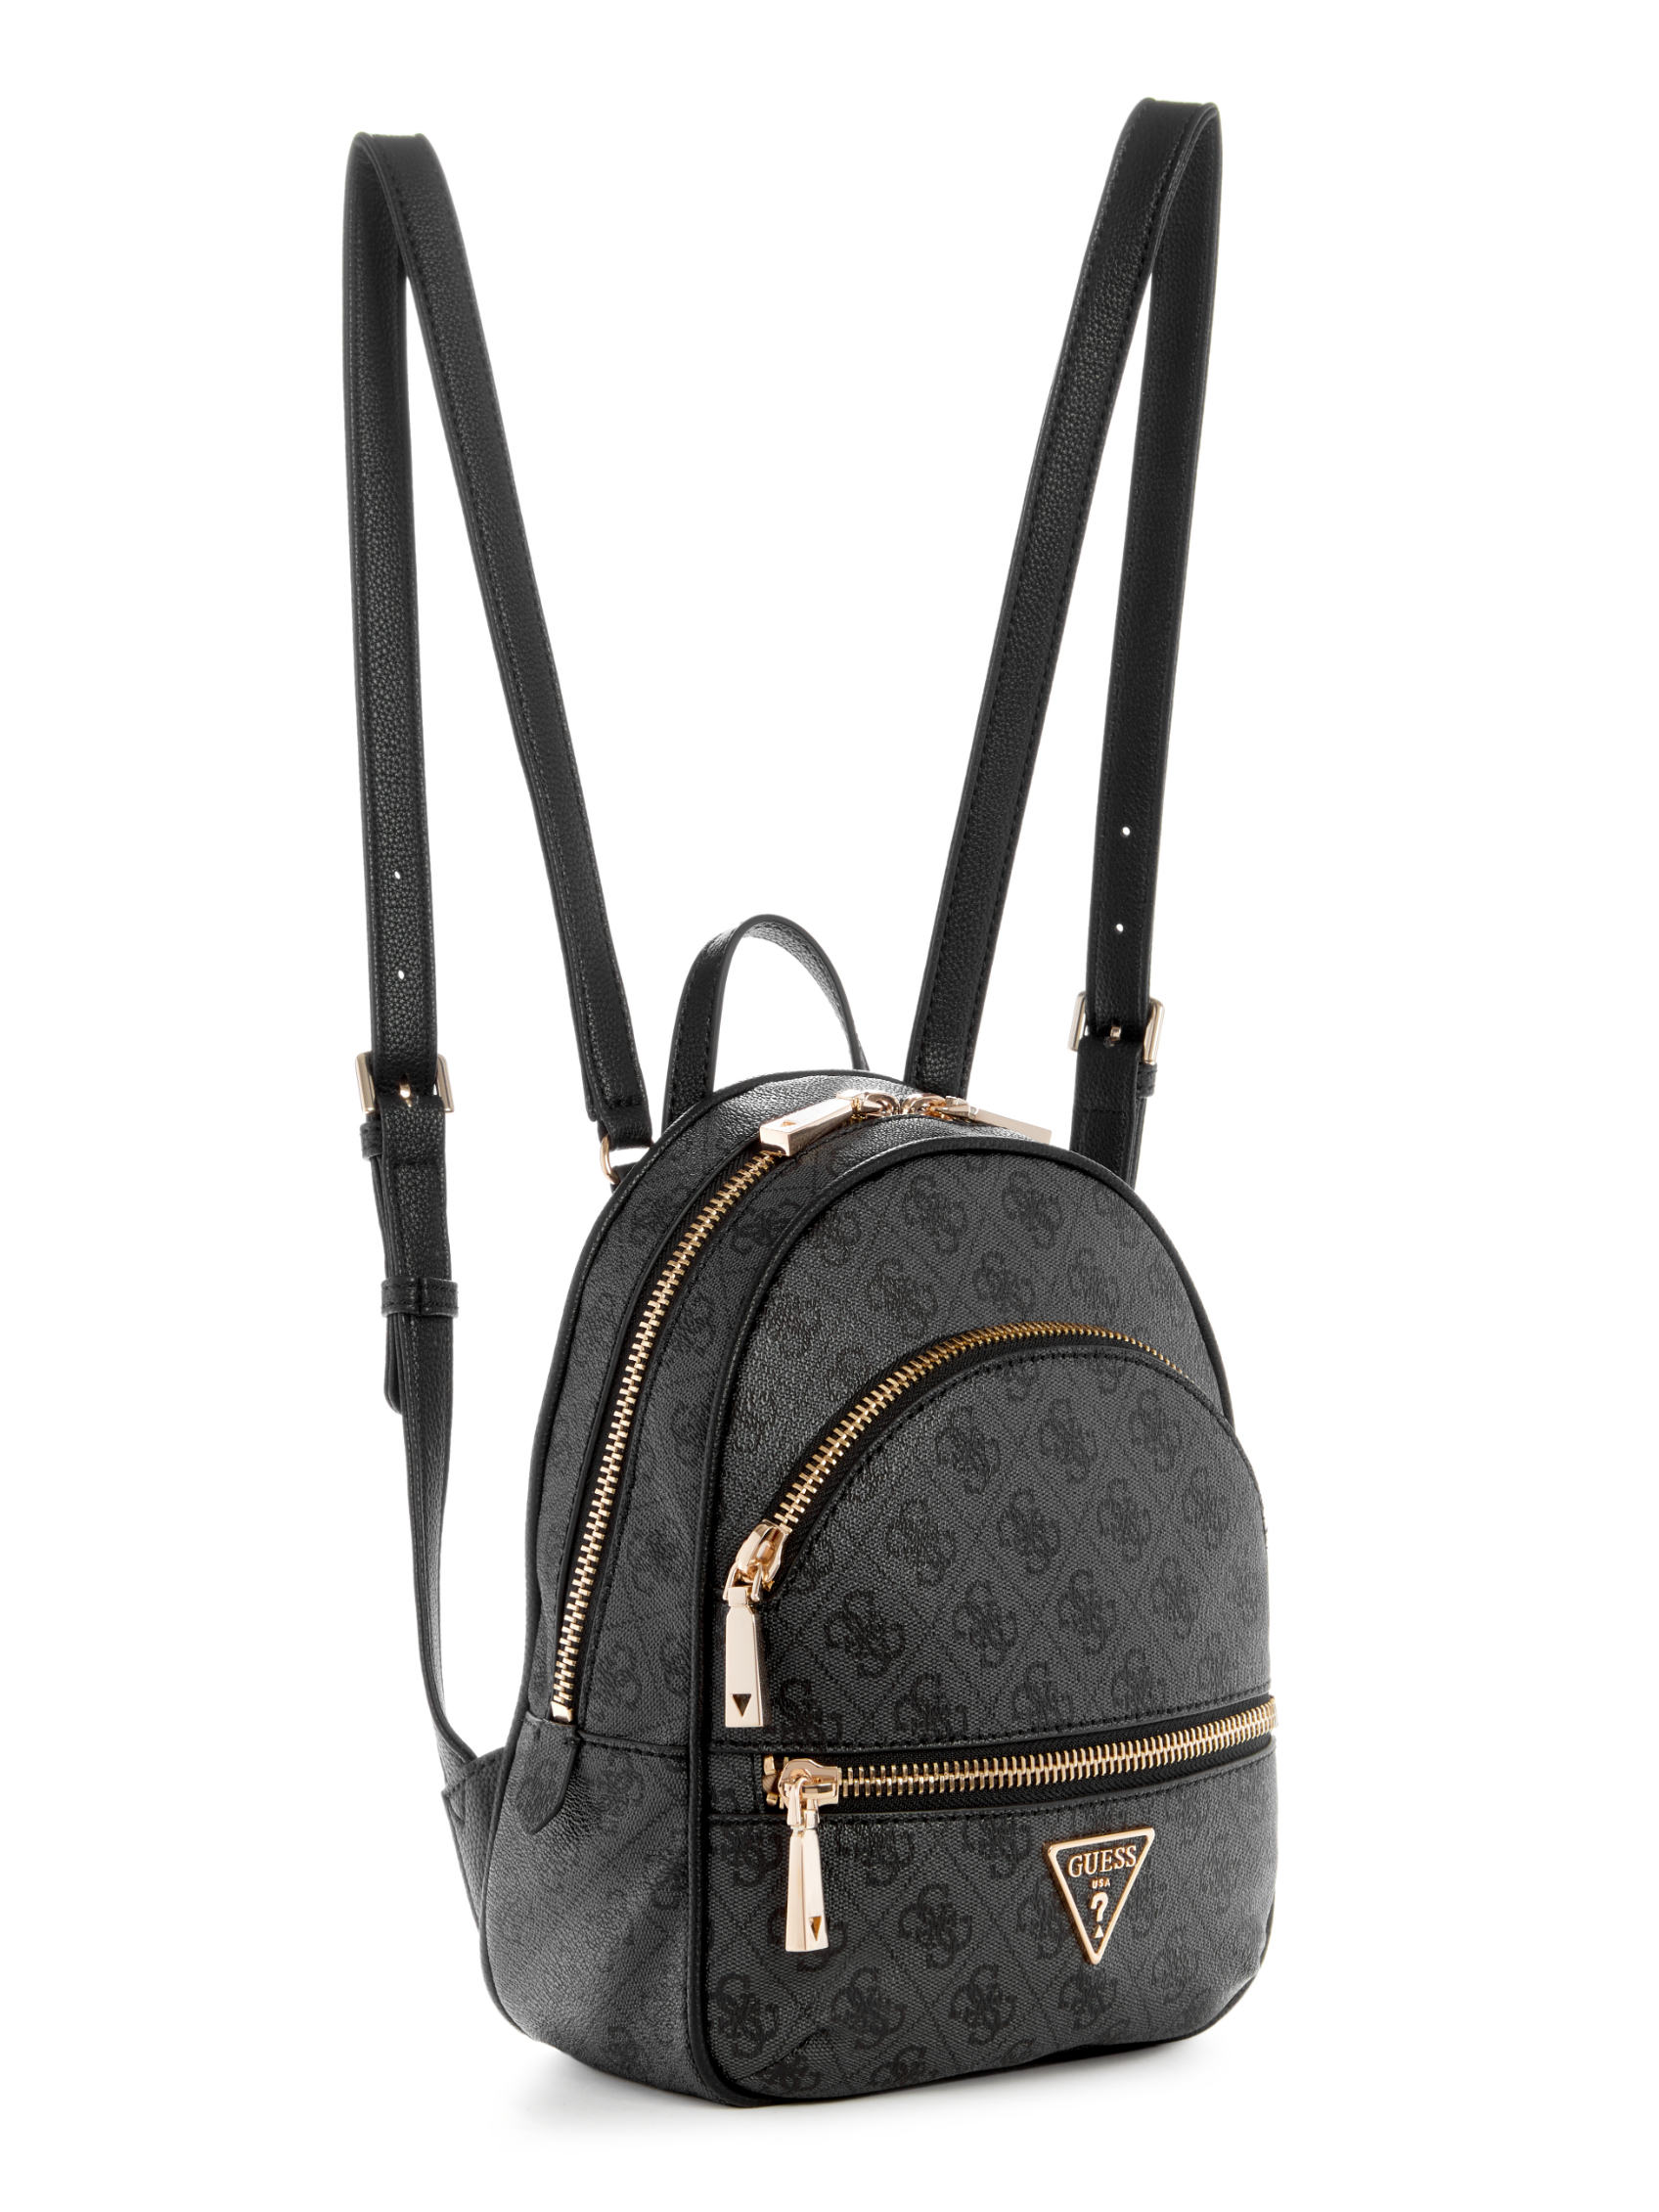 MANHATTAN BACKPACK | Guess Philippines